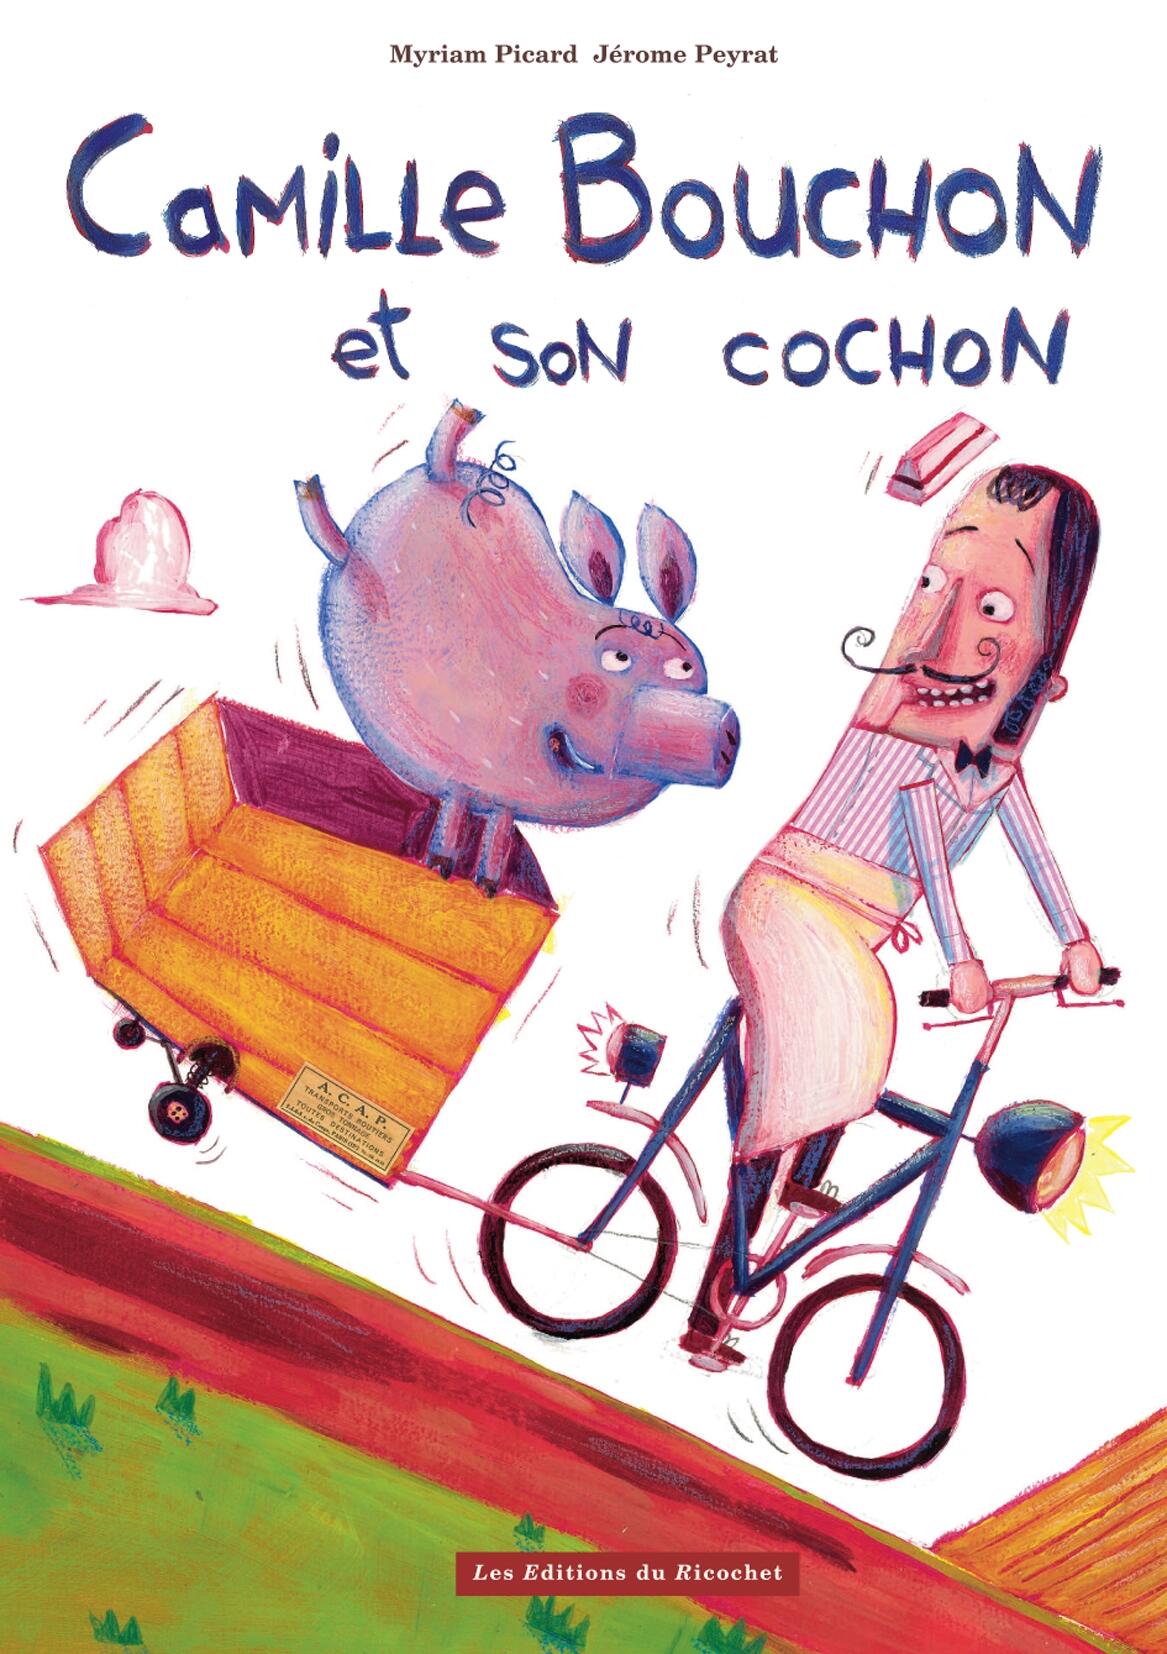 Camille Bouchon and his pig